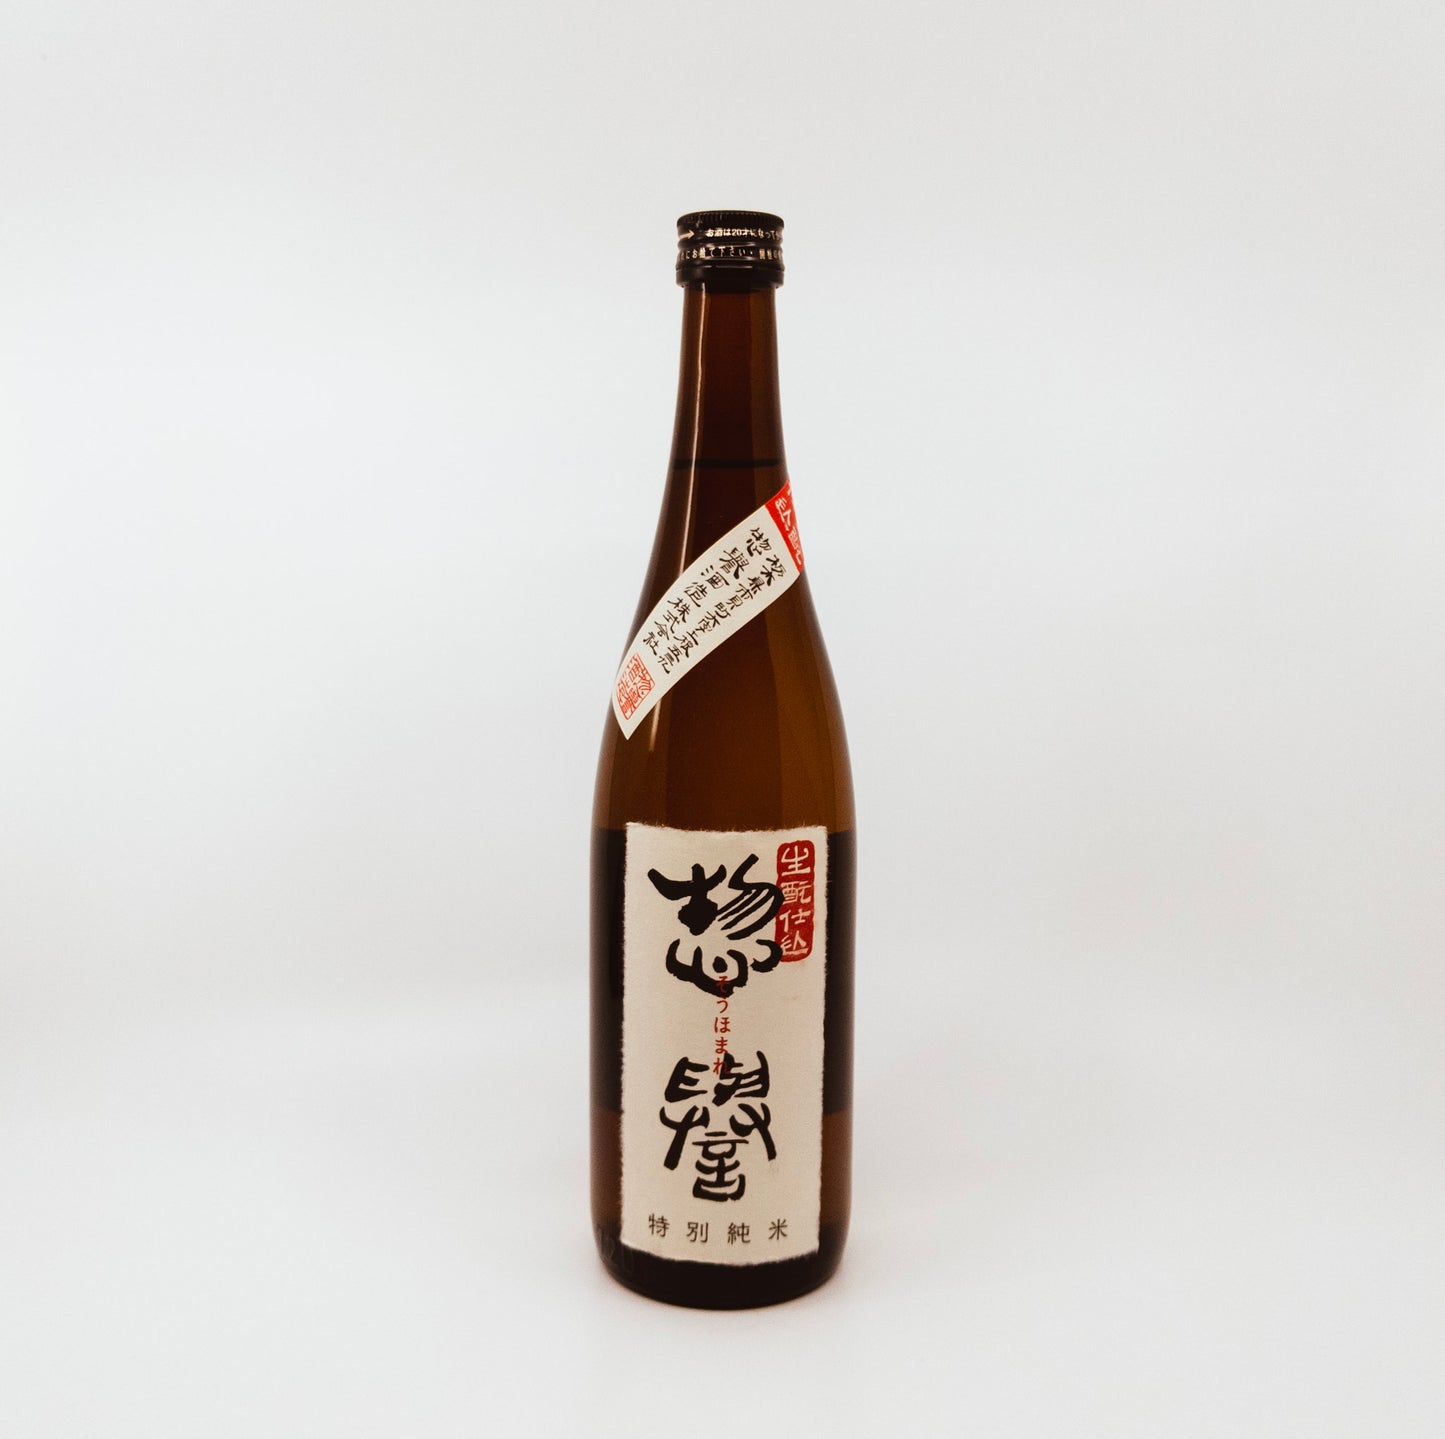 brown bottle with cream label